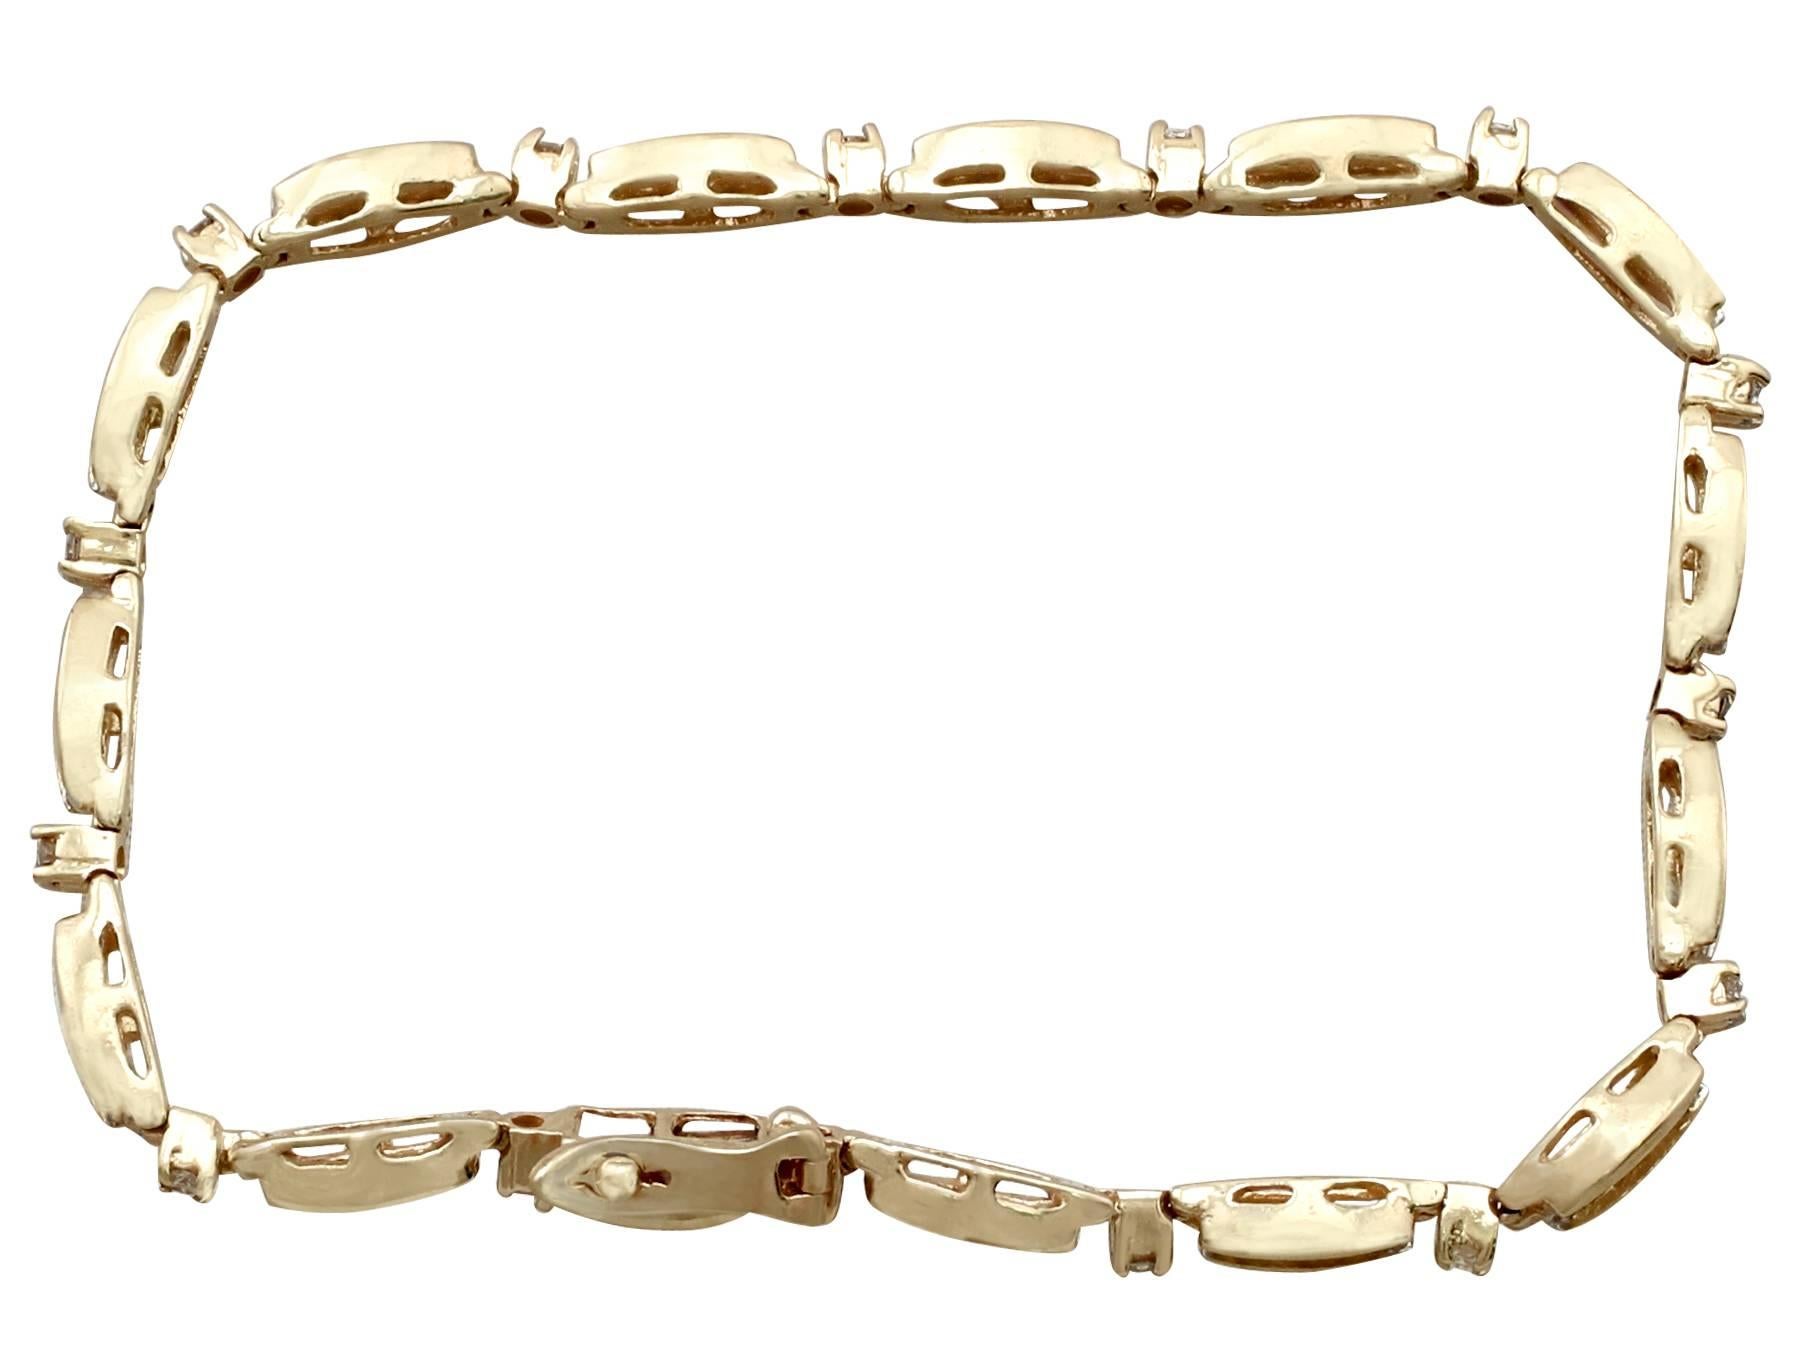 An impressive vintage 2.55 Ct diamond and 14k yellow gold bracelet; part of our diverse vintage jewellery and estate jewelry collections.

This fine and impressive vintage 14k yellow gold and diamond bracelet is composed of fifteen articulated